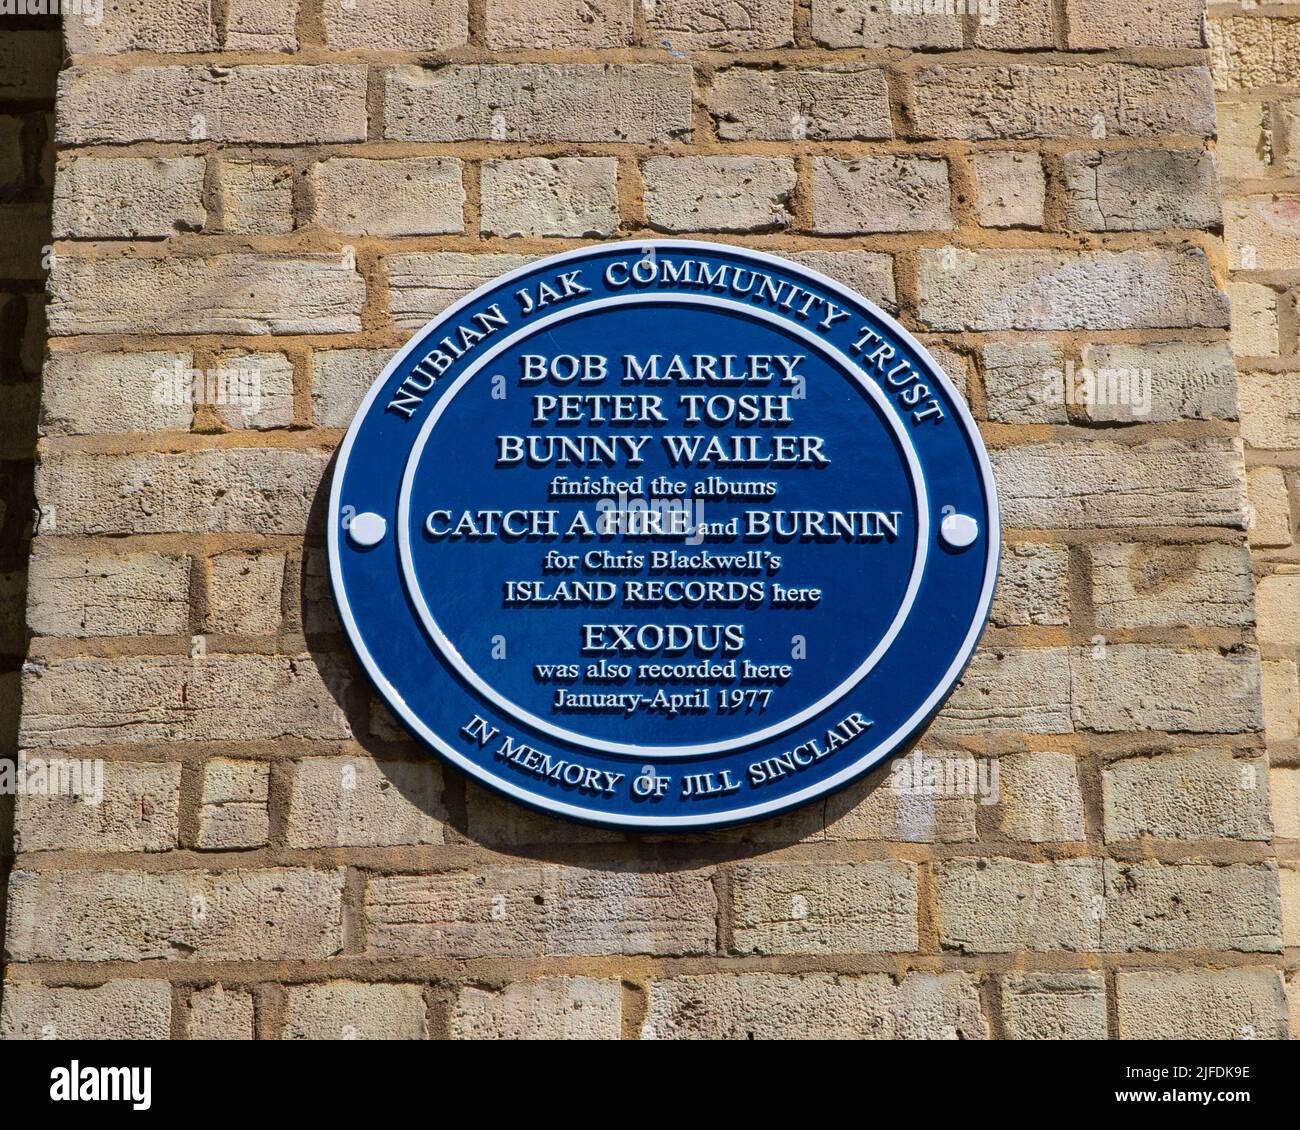 London, UK - May 5th 2022: A plaque on Basing Street in London, UK, marking the location where Bob Marley, Peter Tosh and Bunny Wailer recorded music. Stock Photo